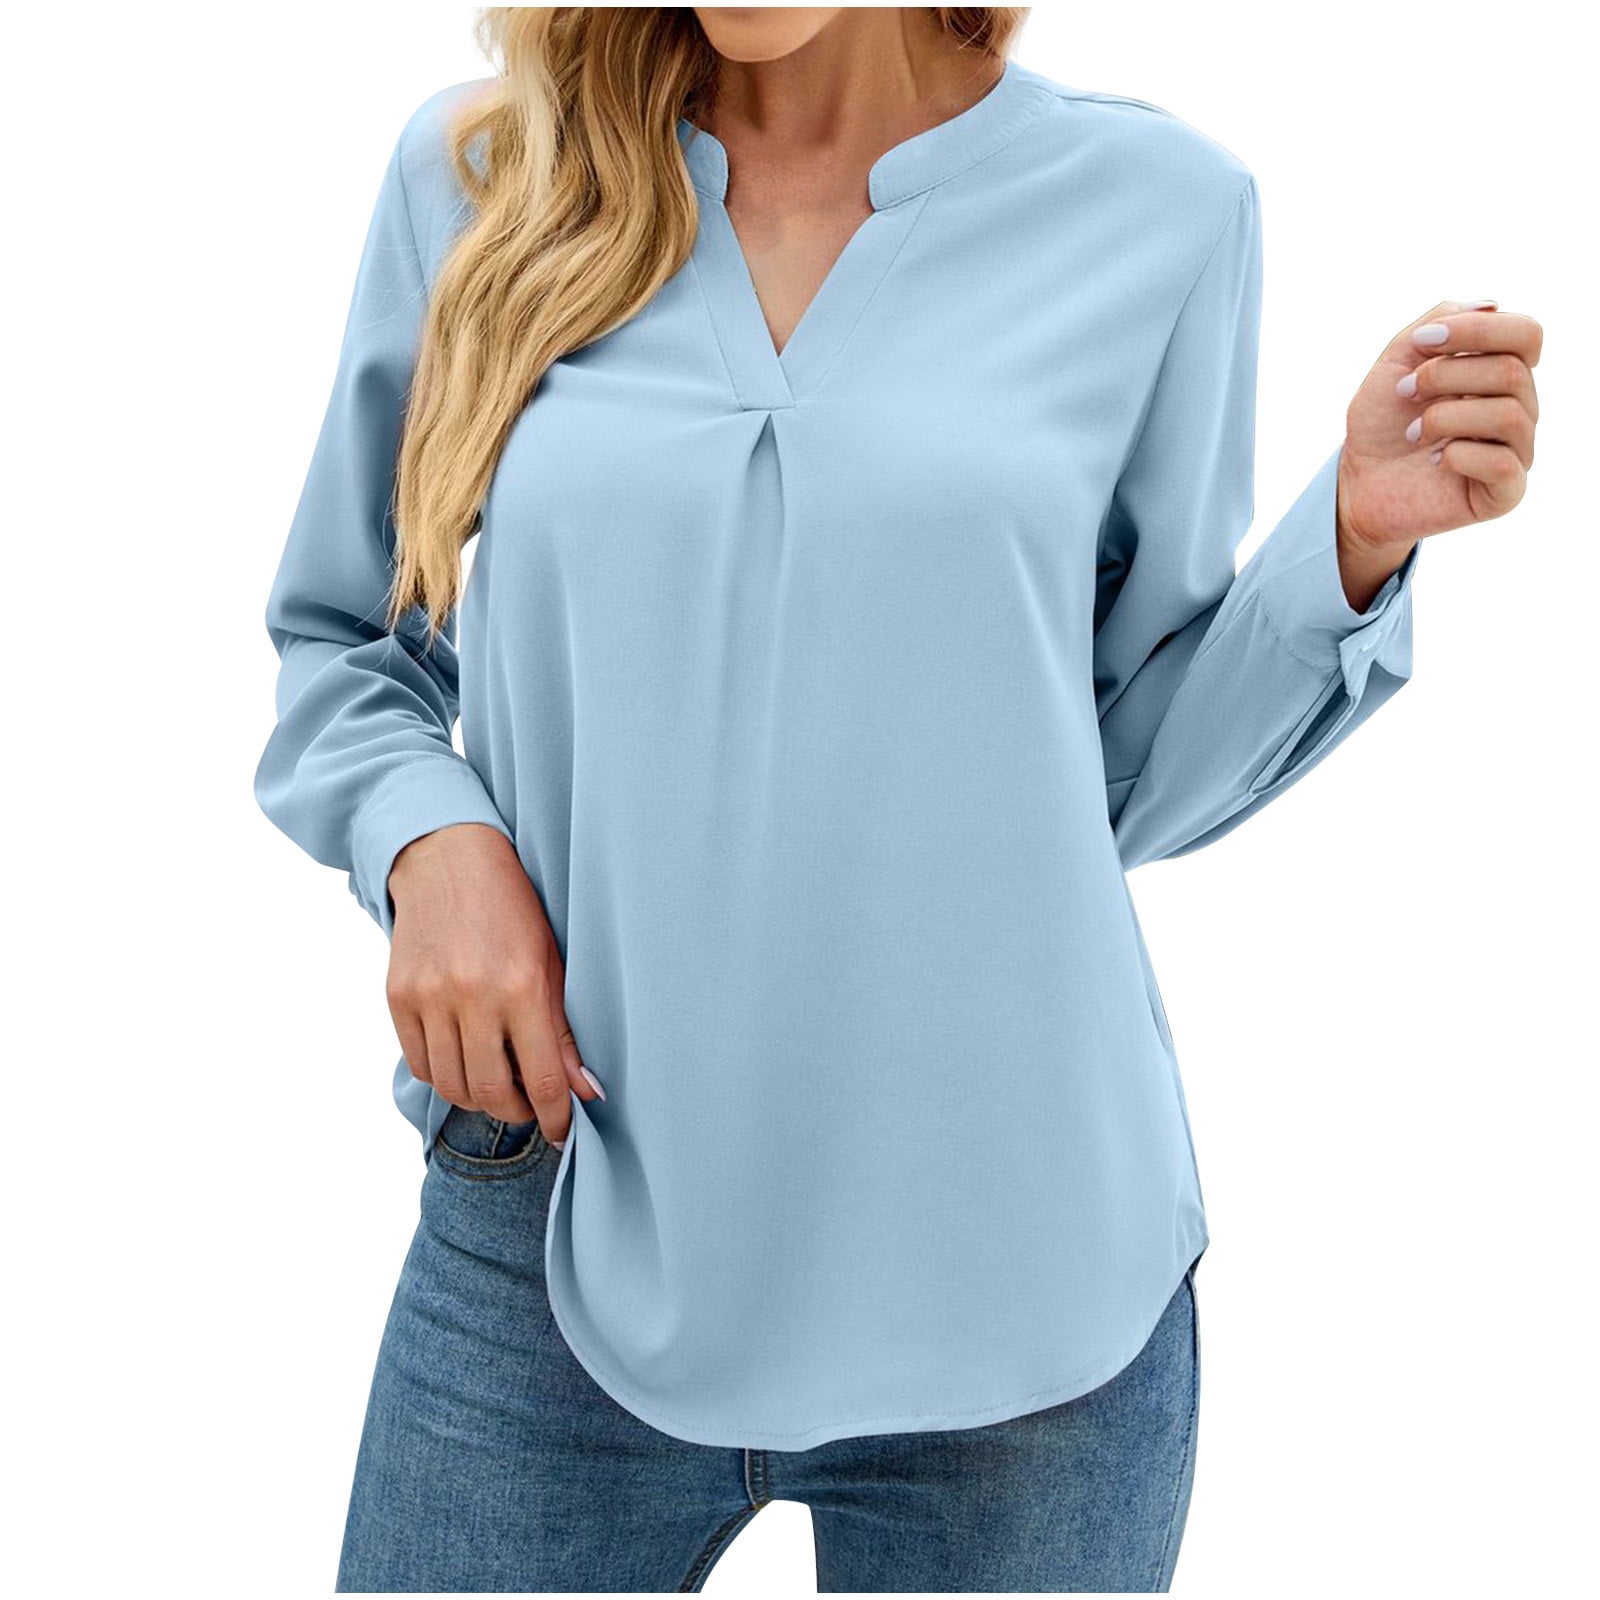 tklpehg Long Sleeve Shirts for Women Ladies Tops Long Sleeve Shirts Classic  Solid Colors Comfortable Casual V-Neck Lightweight Loose Fit Blouse